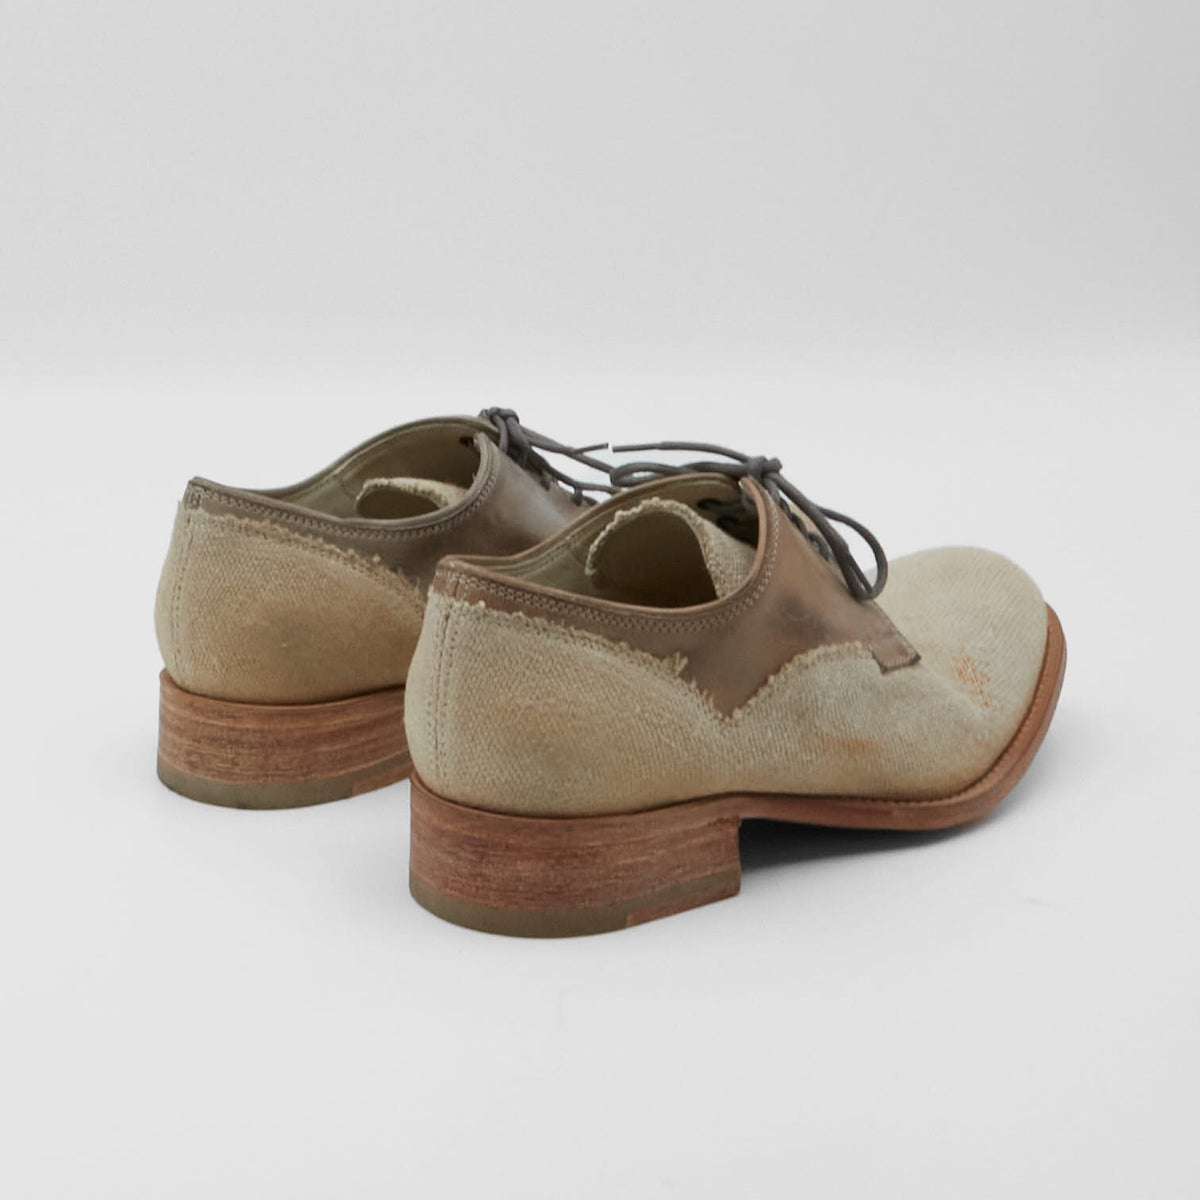 n.d.c. made by hand Ladies Leather Lined Linen Shoe